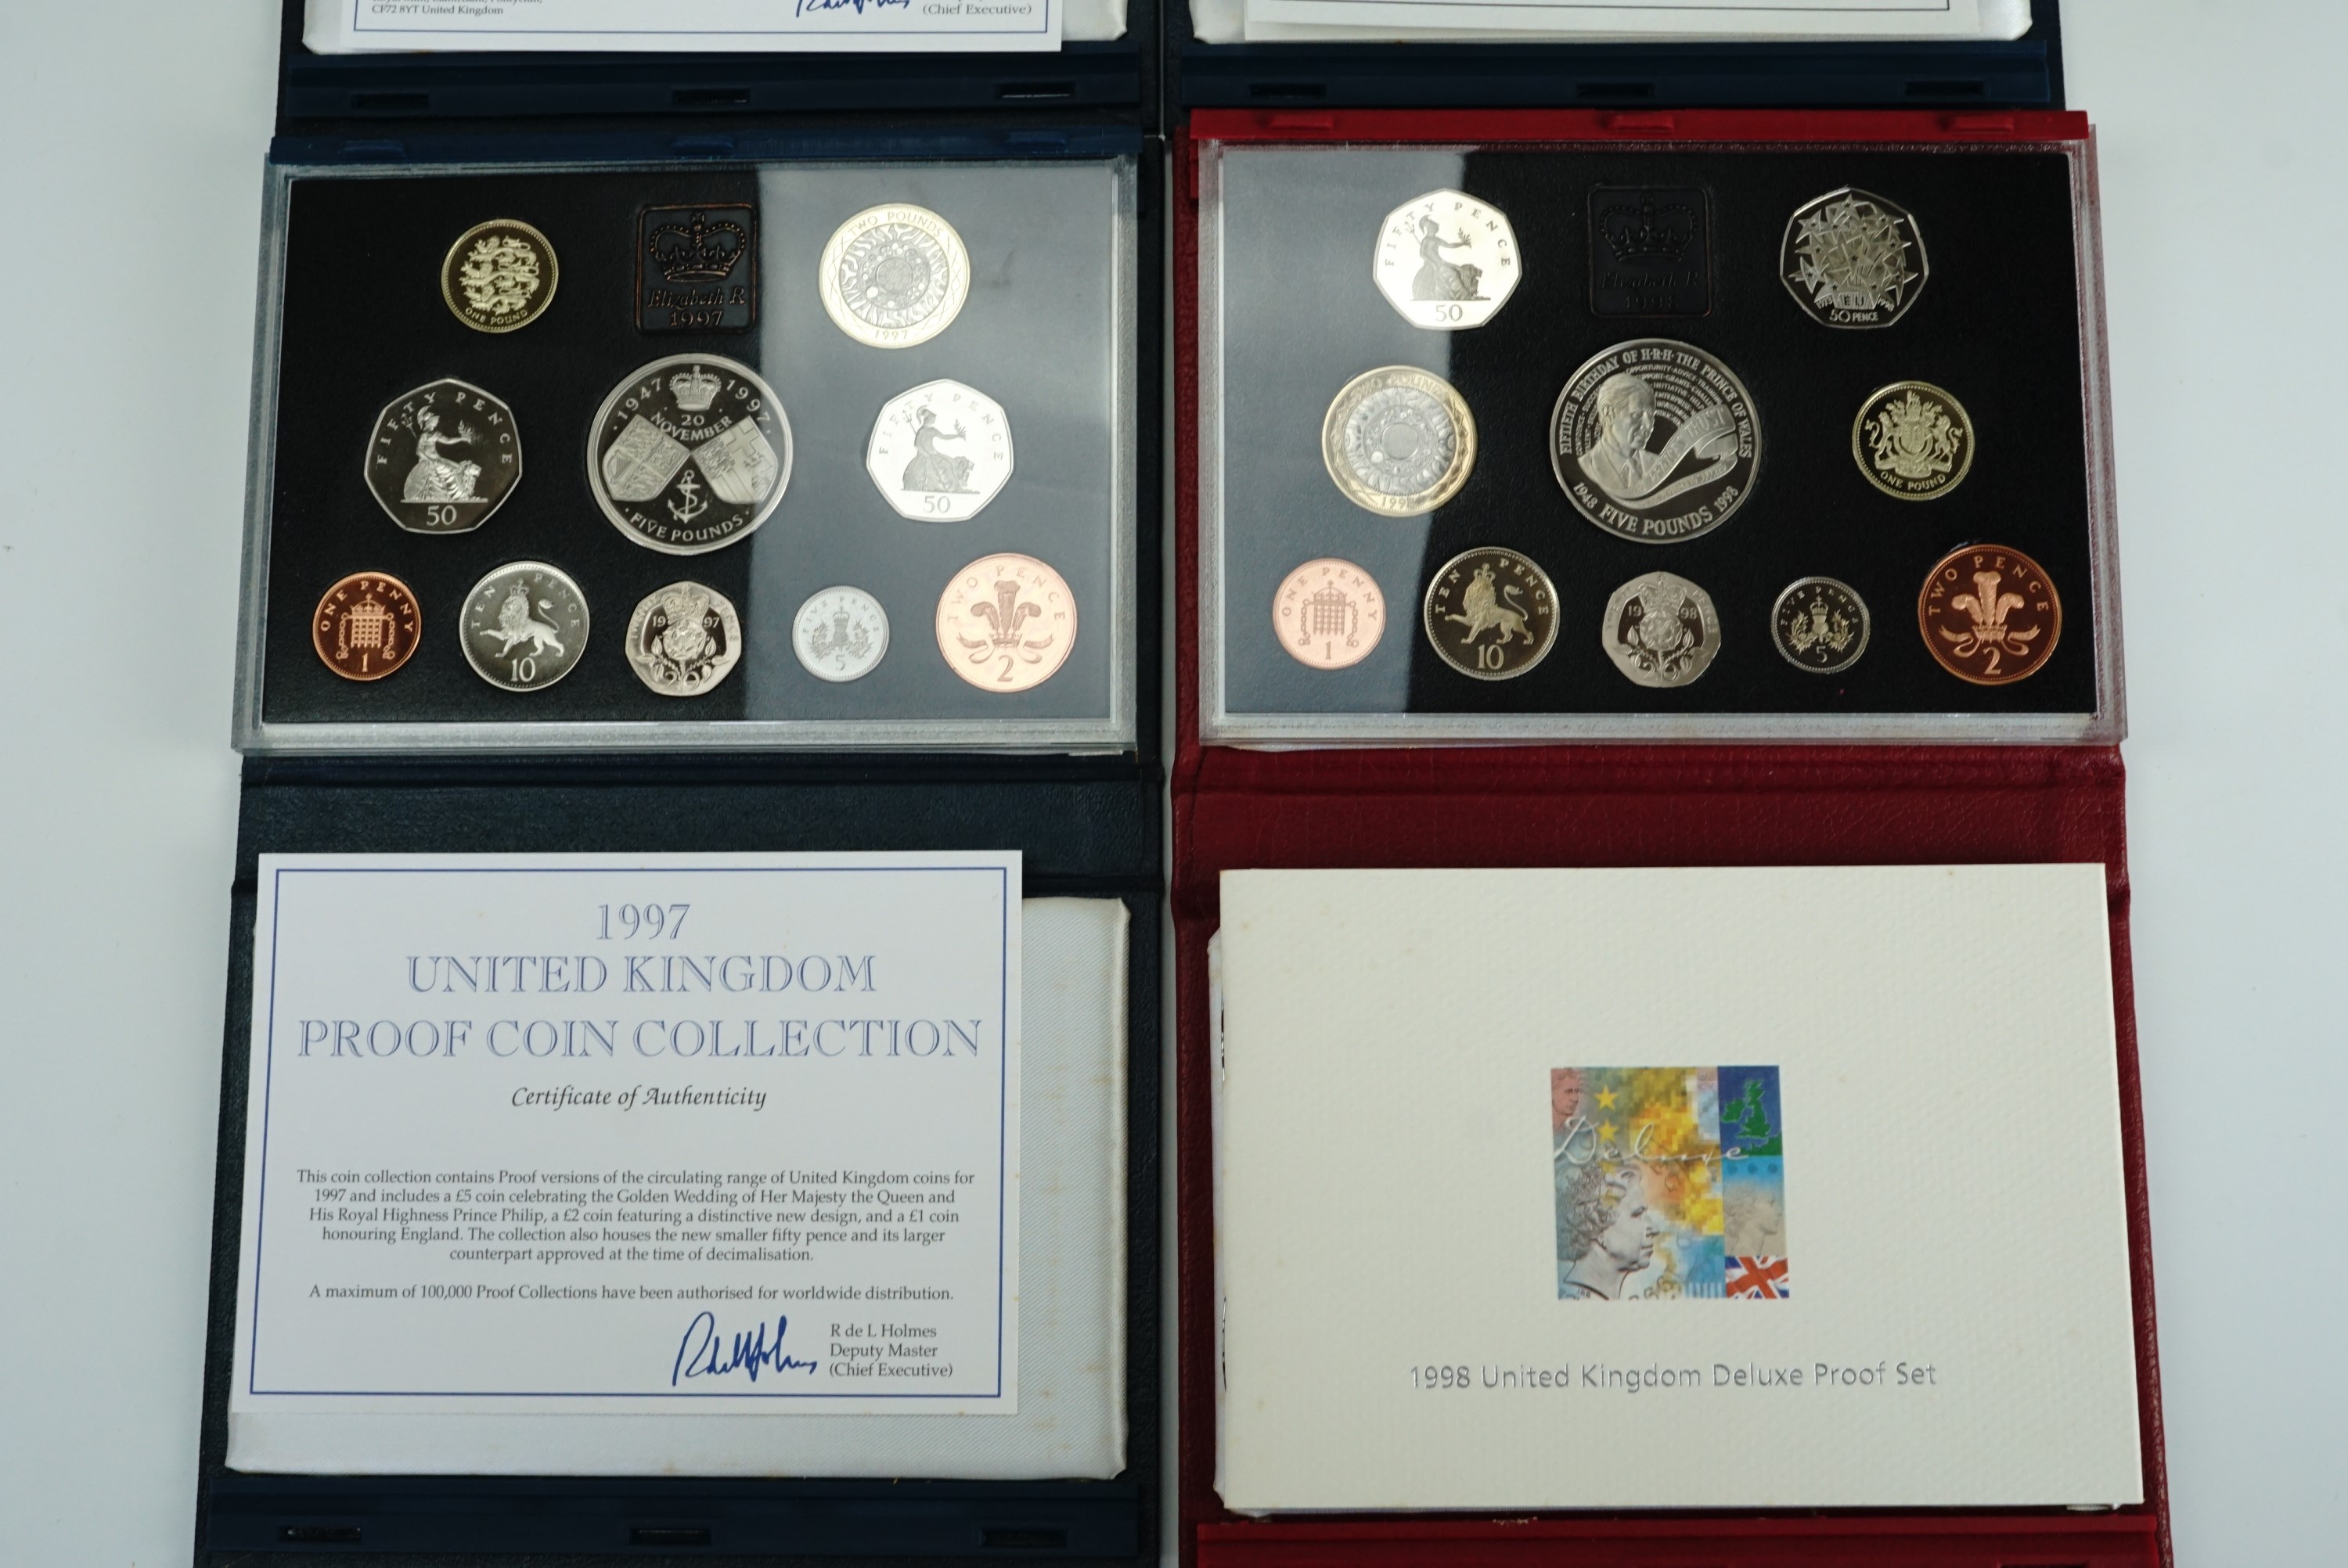 Four Royal Mint United Kingdom Proof Coin Collections, for the years 1998, 1997, 1995 and 1999, with - Image 2 of 3